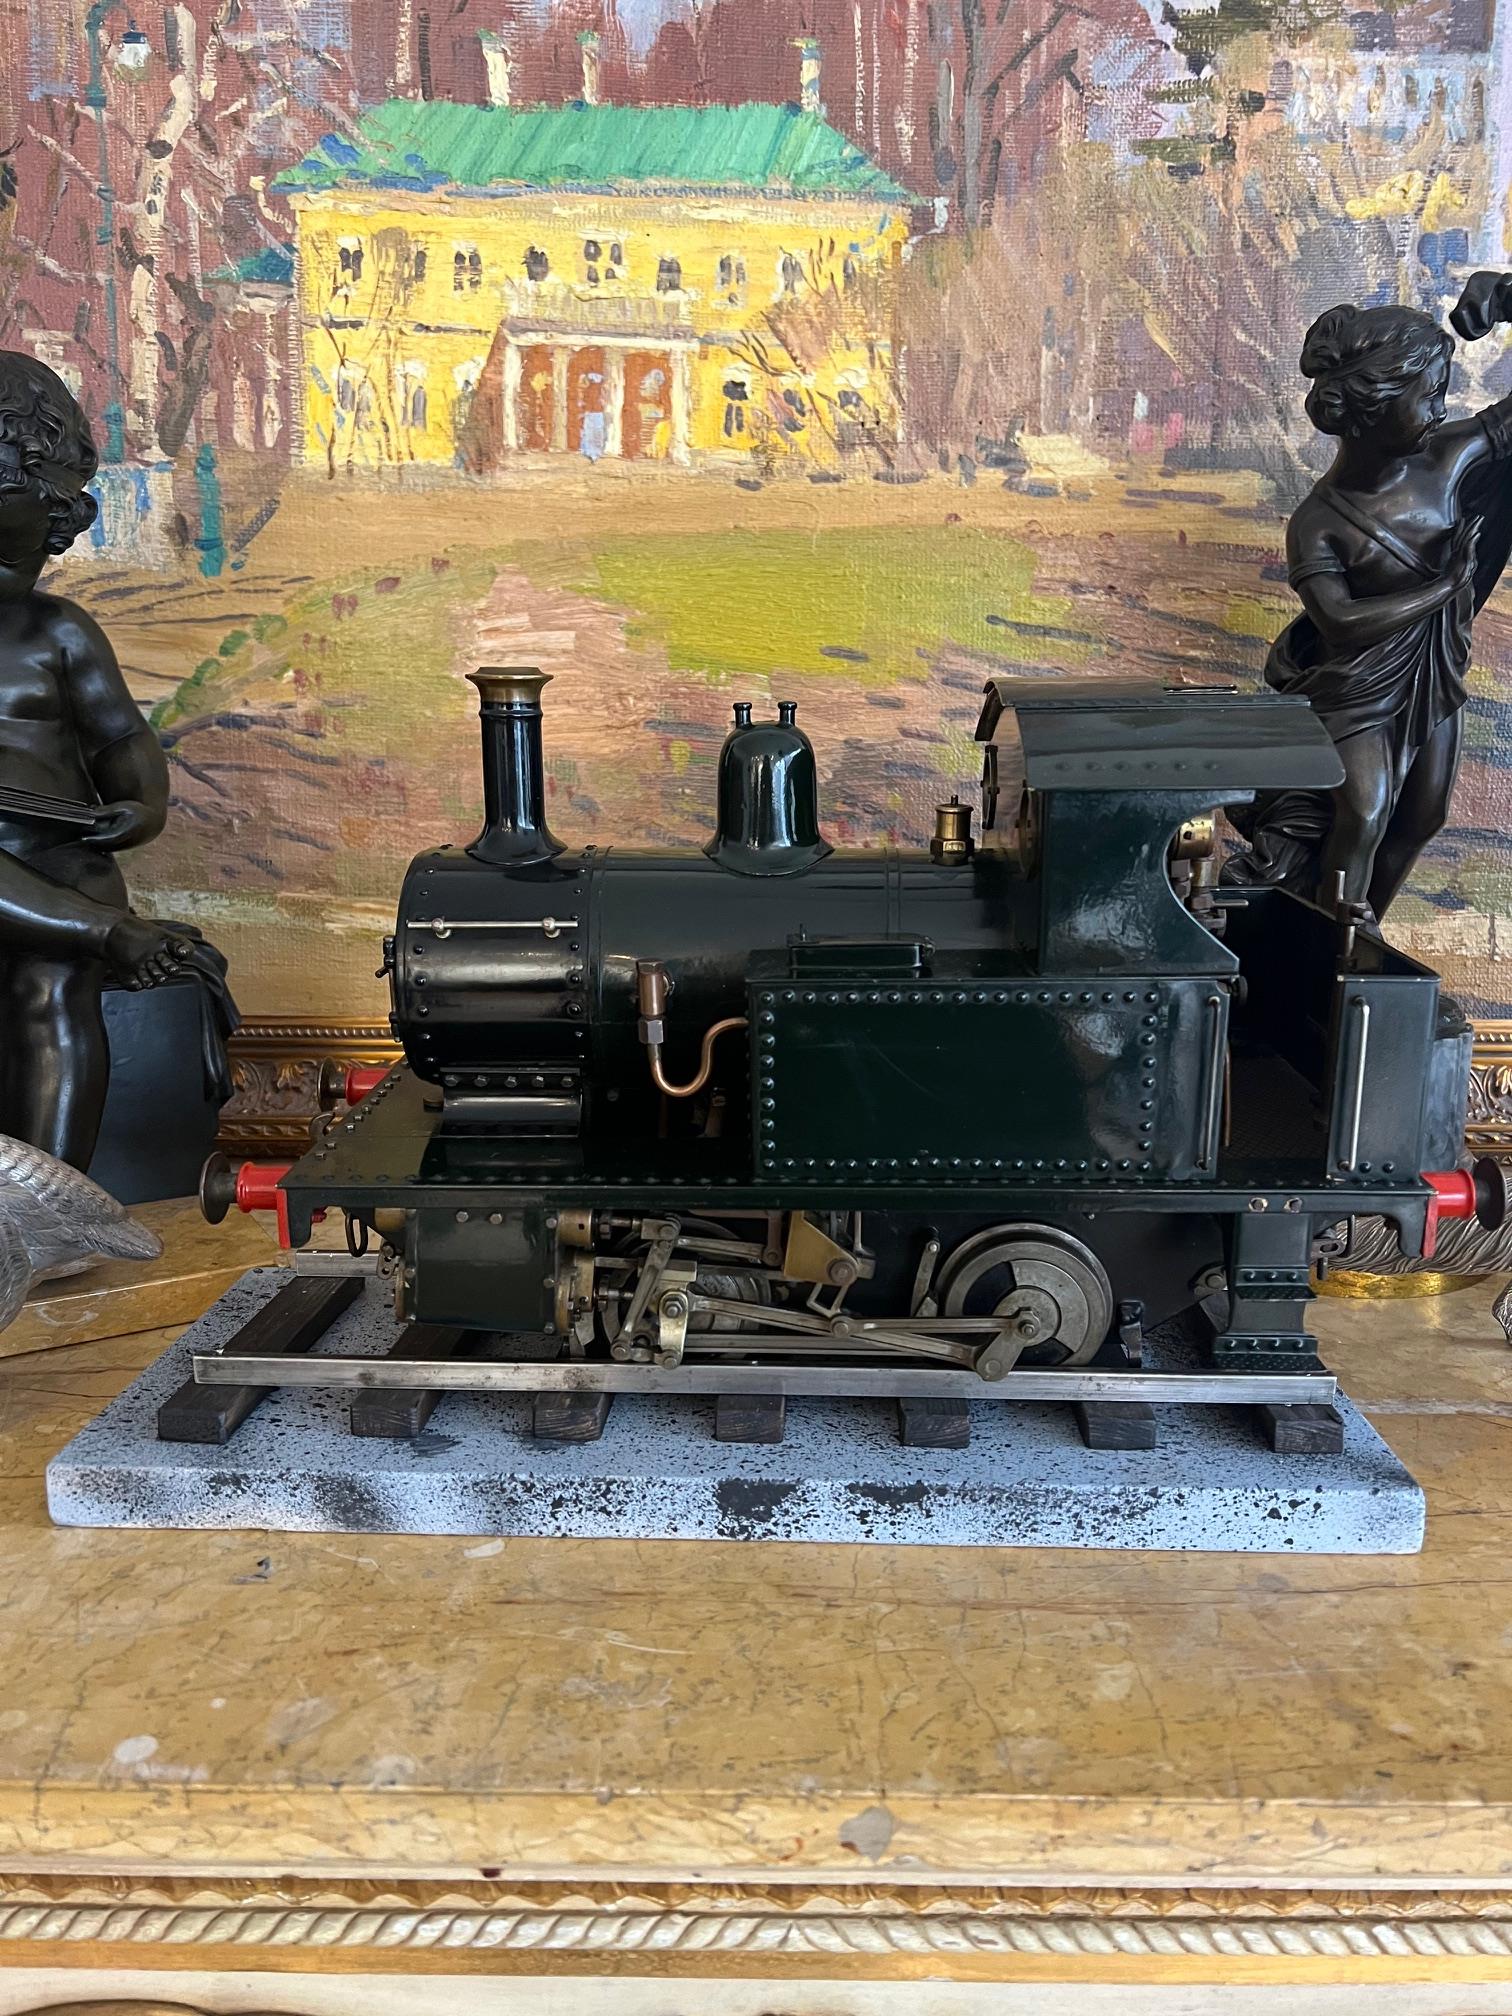 A FULL WORKING MODEL OF A STEAM TRAIN - Image 38 of 45